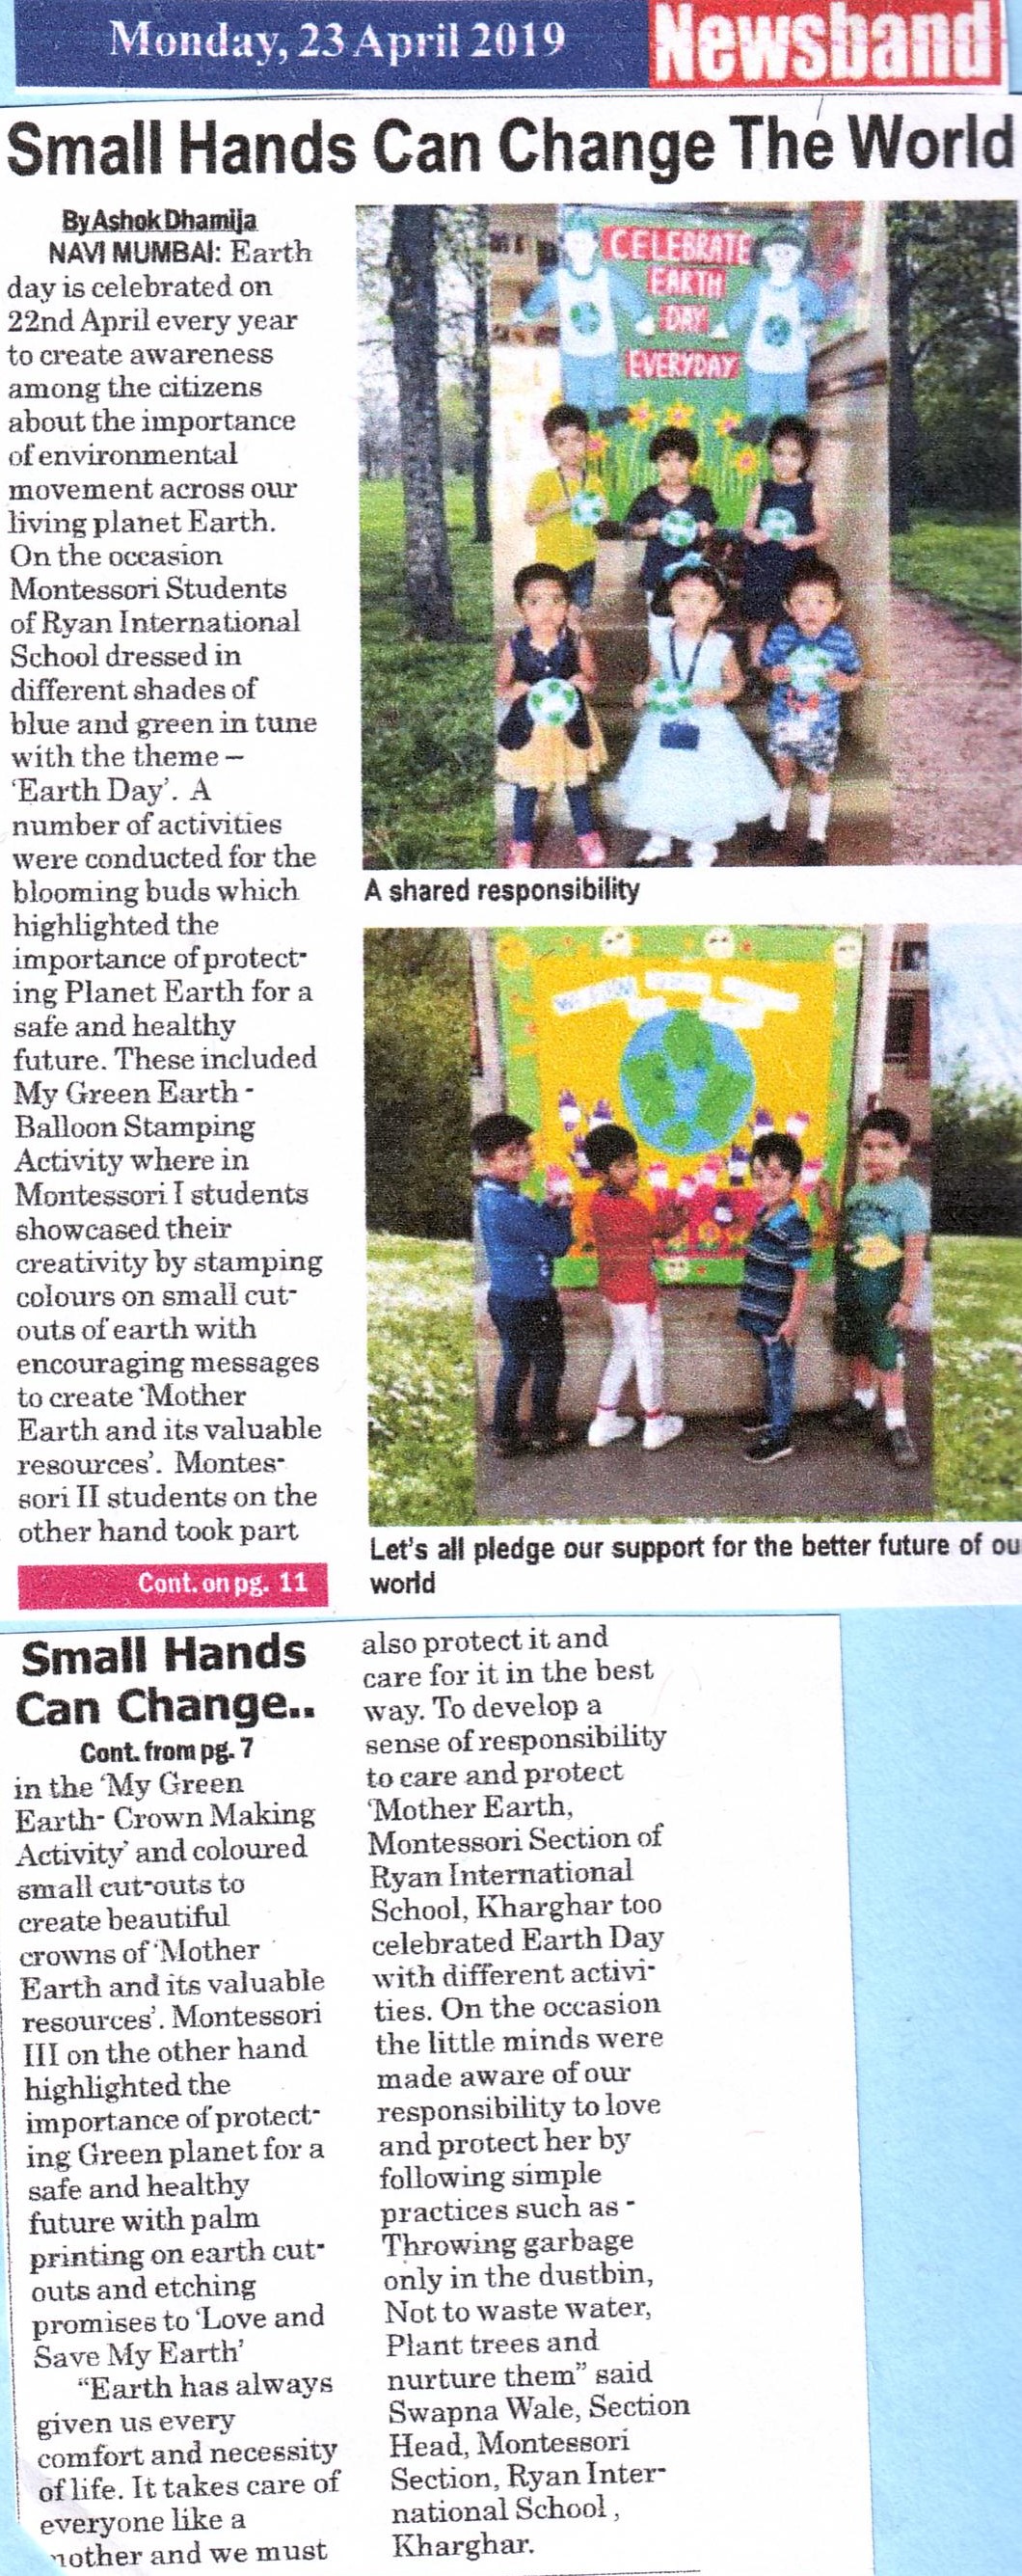 Small hands can change the world was mentioned in Newsband - Ryan International School, Kharghar